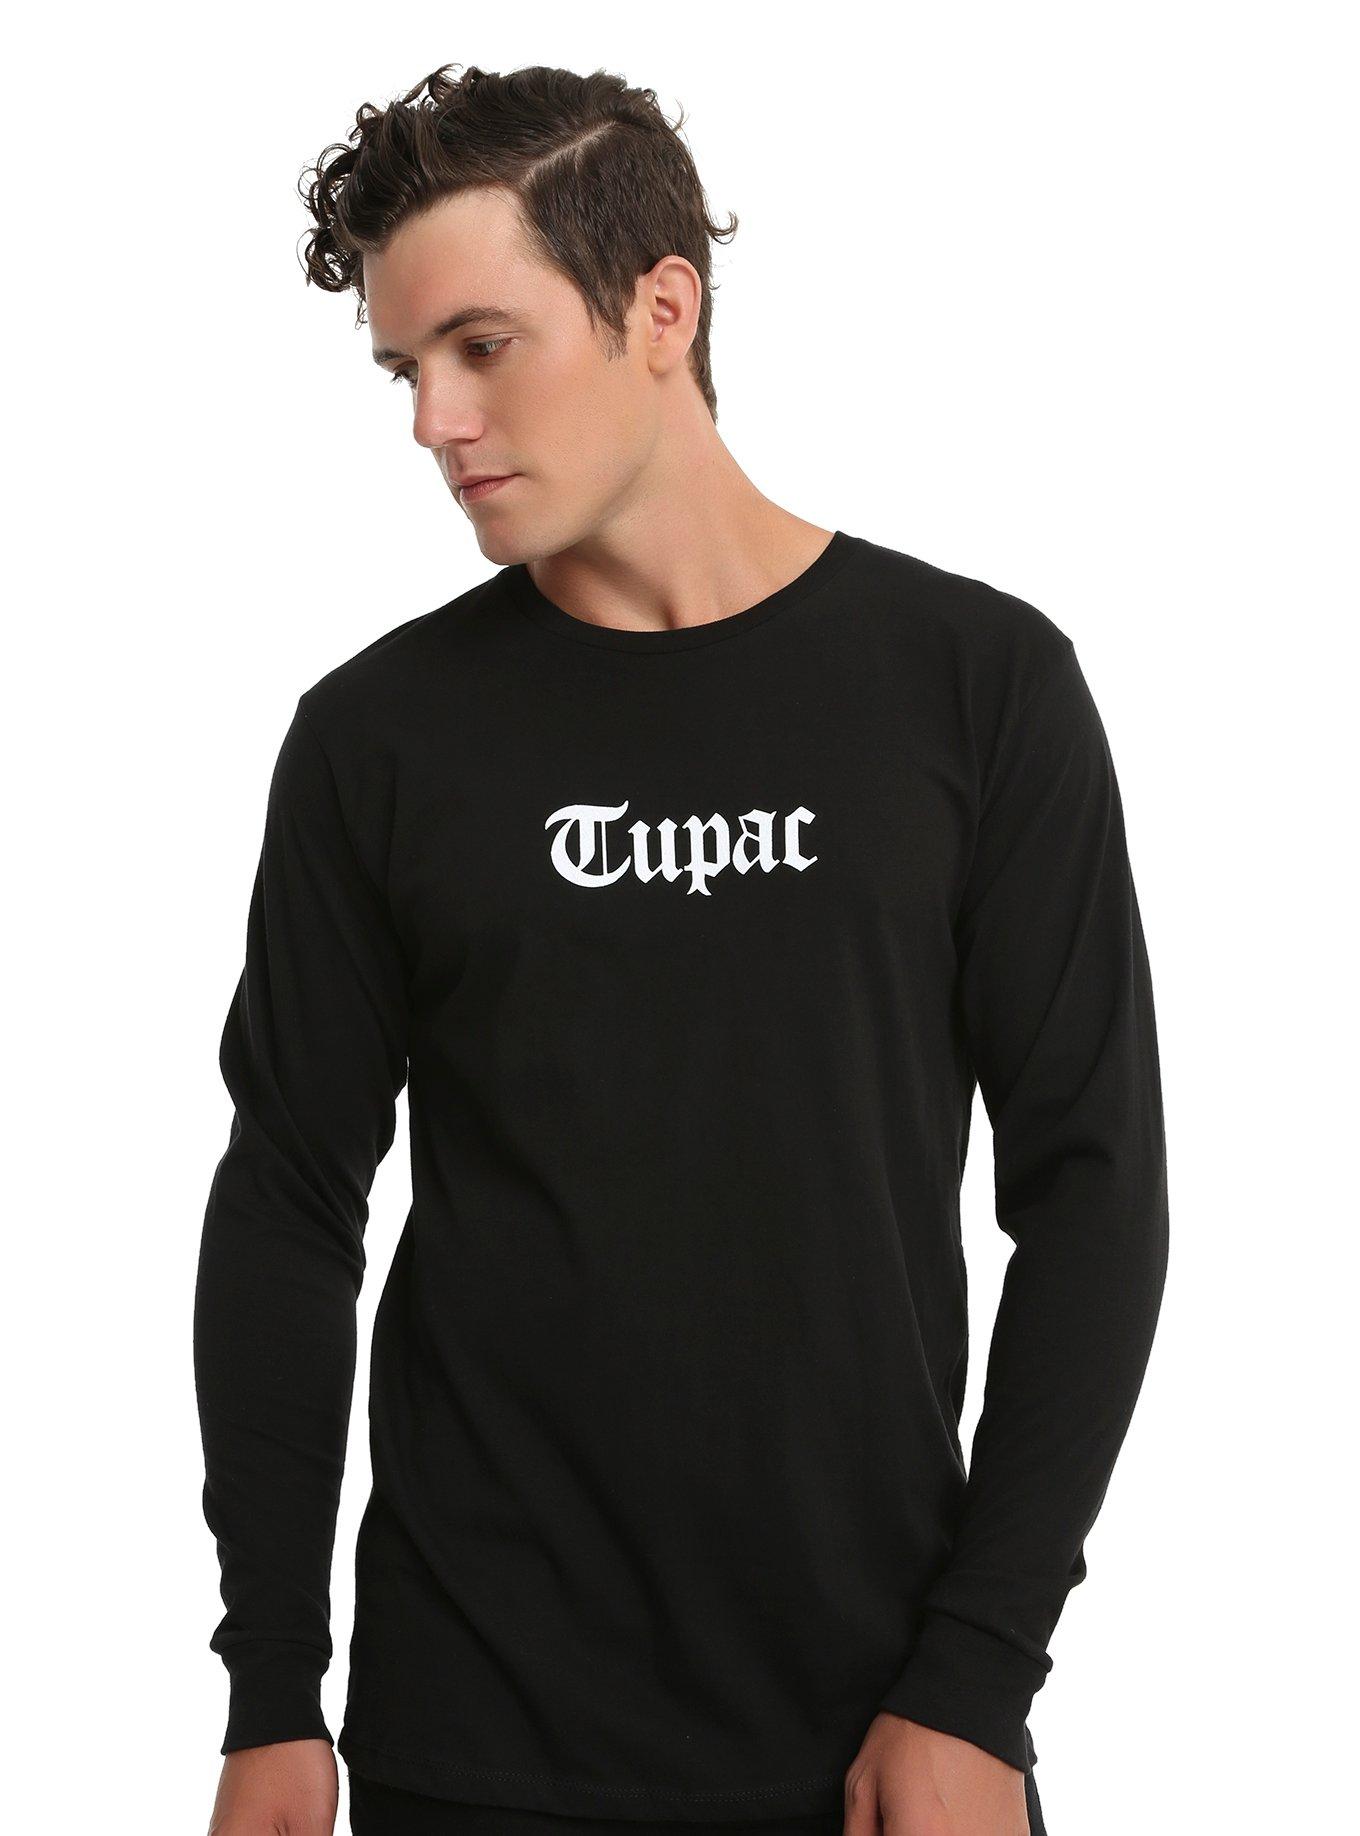 Tupac Only God Can Judge Me Long-Sleeve T-Shirt, BLACK, hi-res